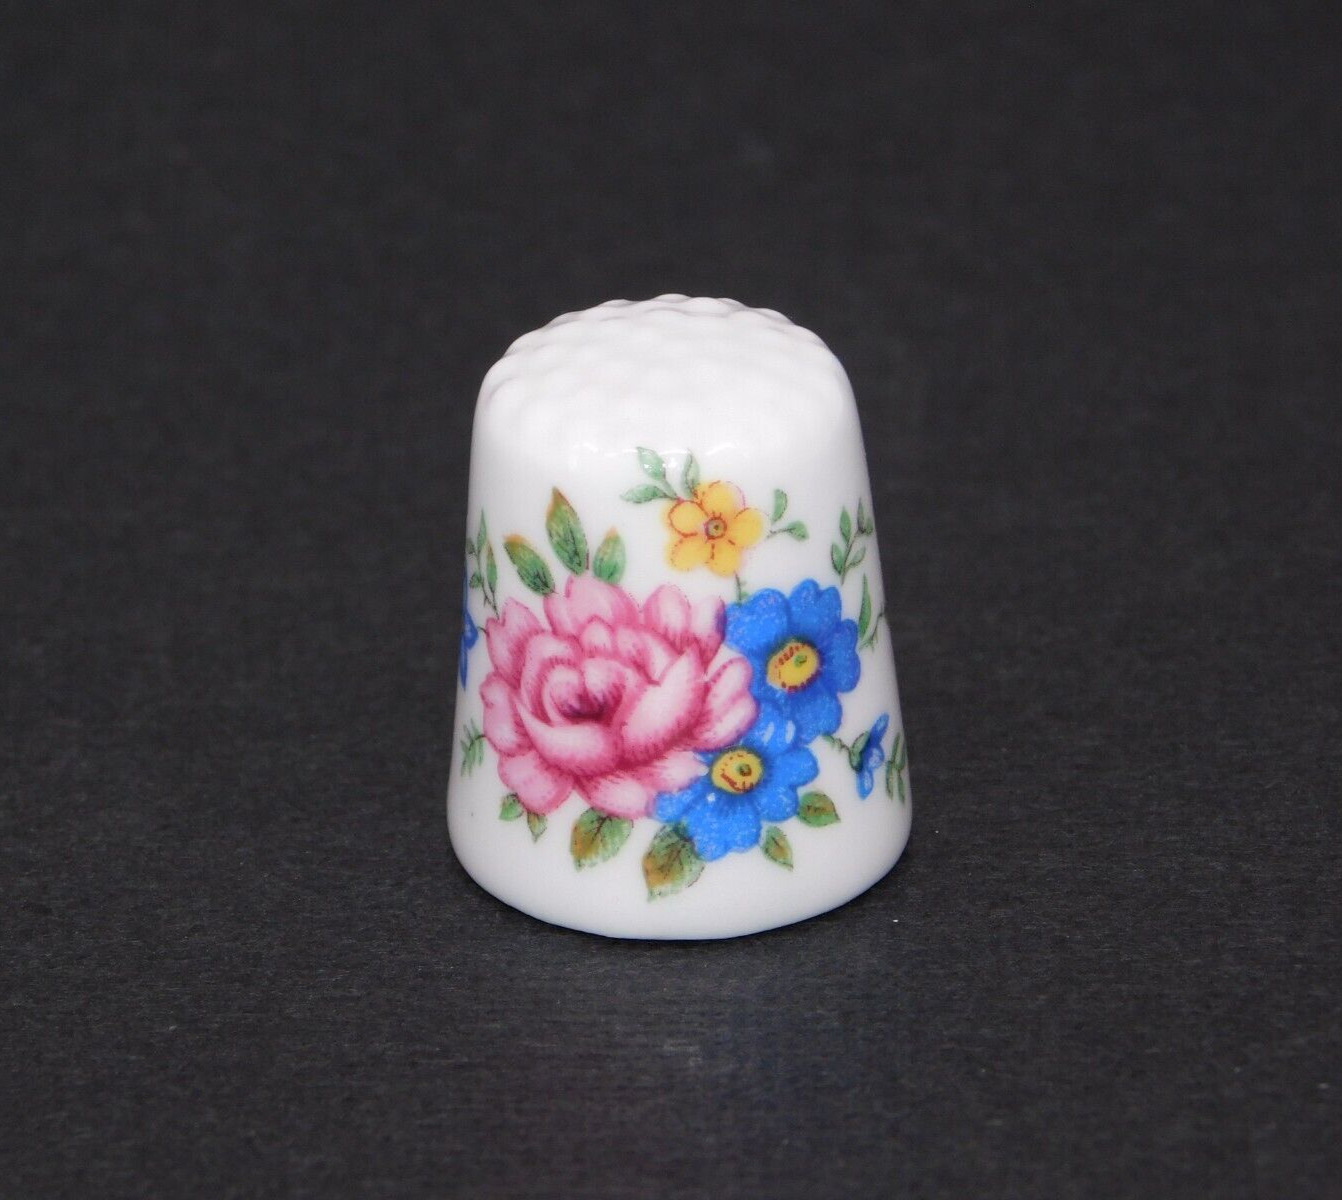 Vintage Signed Royal Windsor Made in England Floral Bone China Sewing Thimble